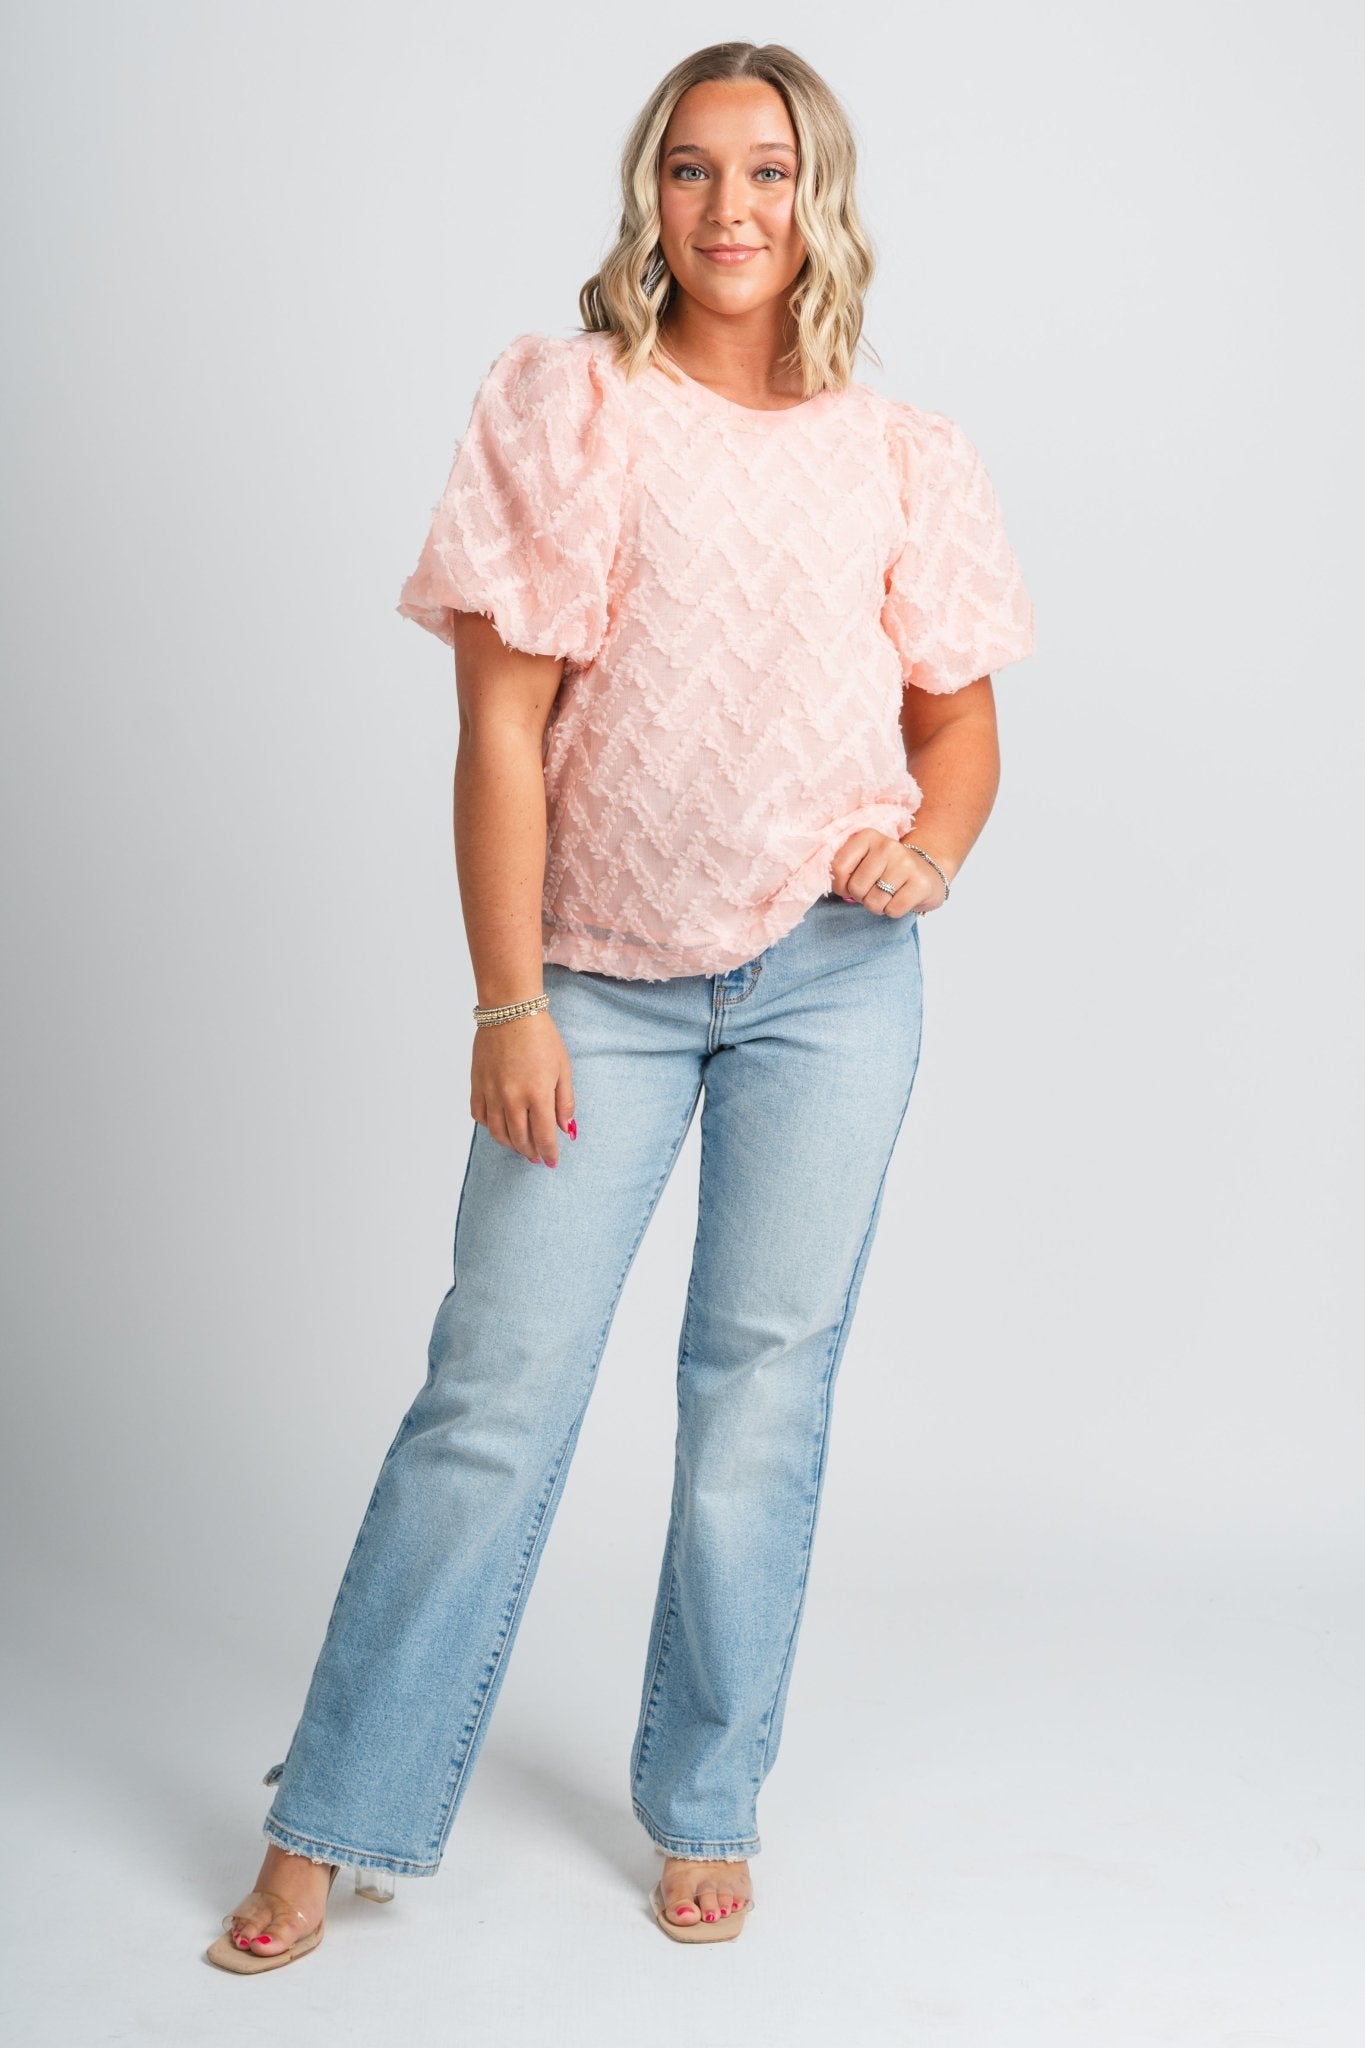 Cello high rise dad jeans light denim - Cute jeans - Trendy Easter Clothing Line at Lush Fashion Lounge Boutique in Oklahoma